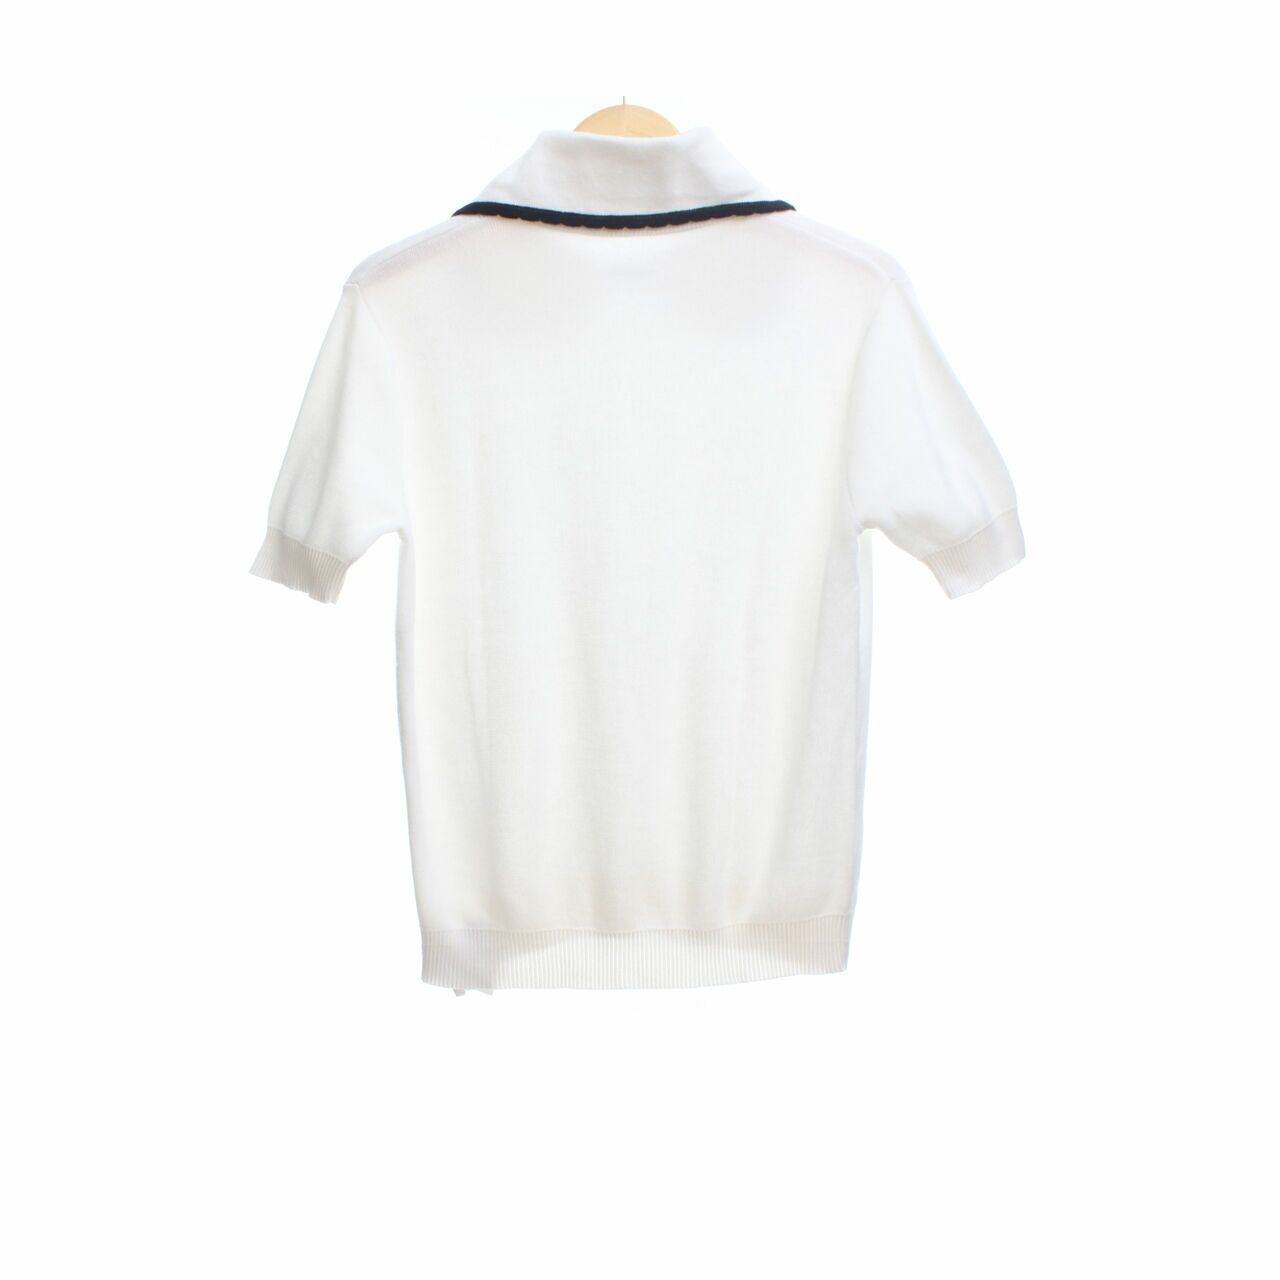 Private Collection White Knit Blouse